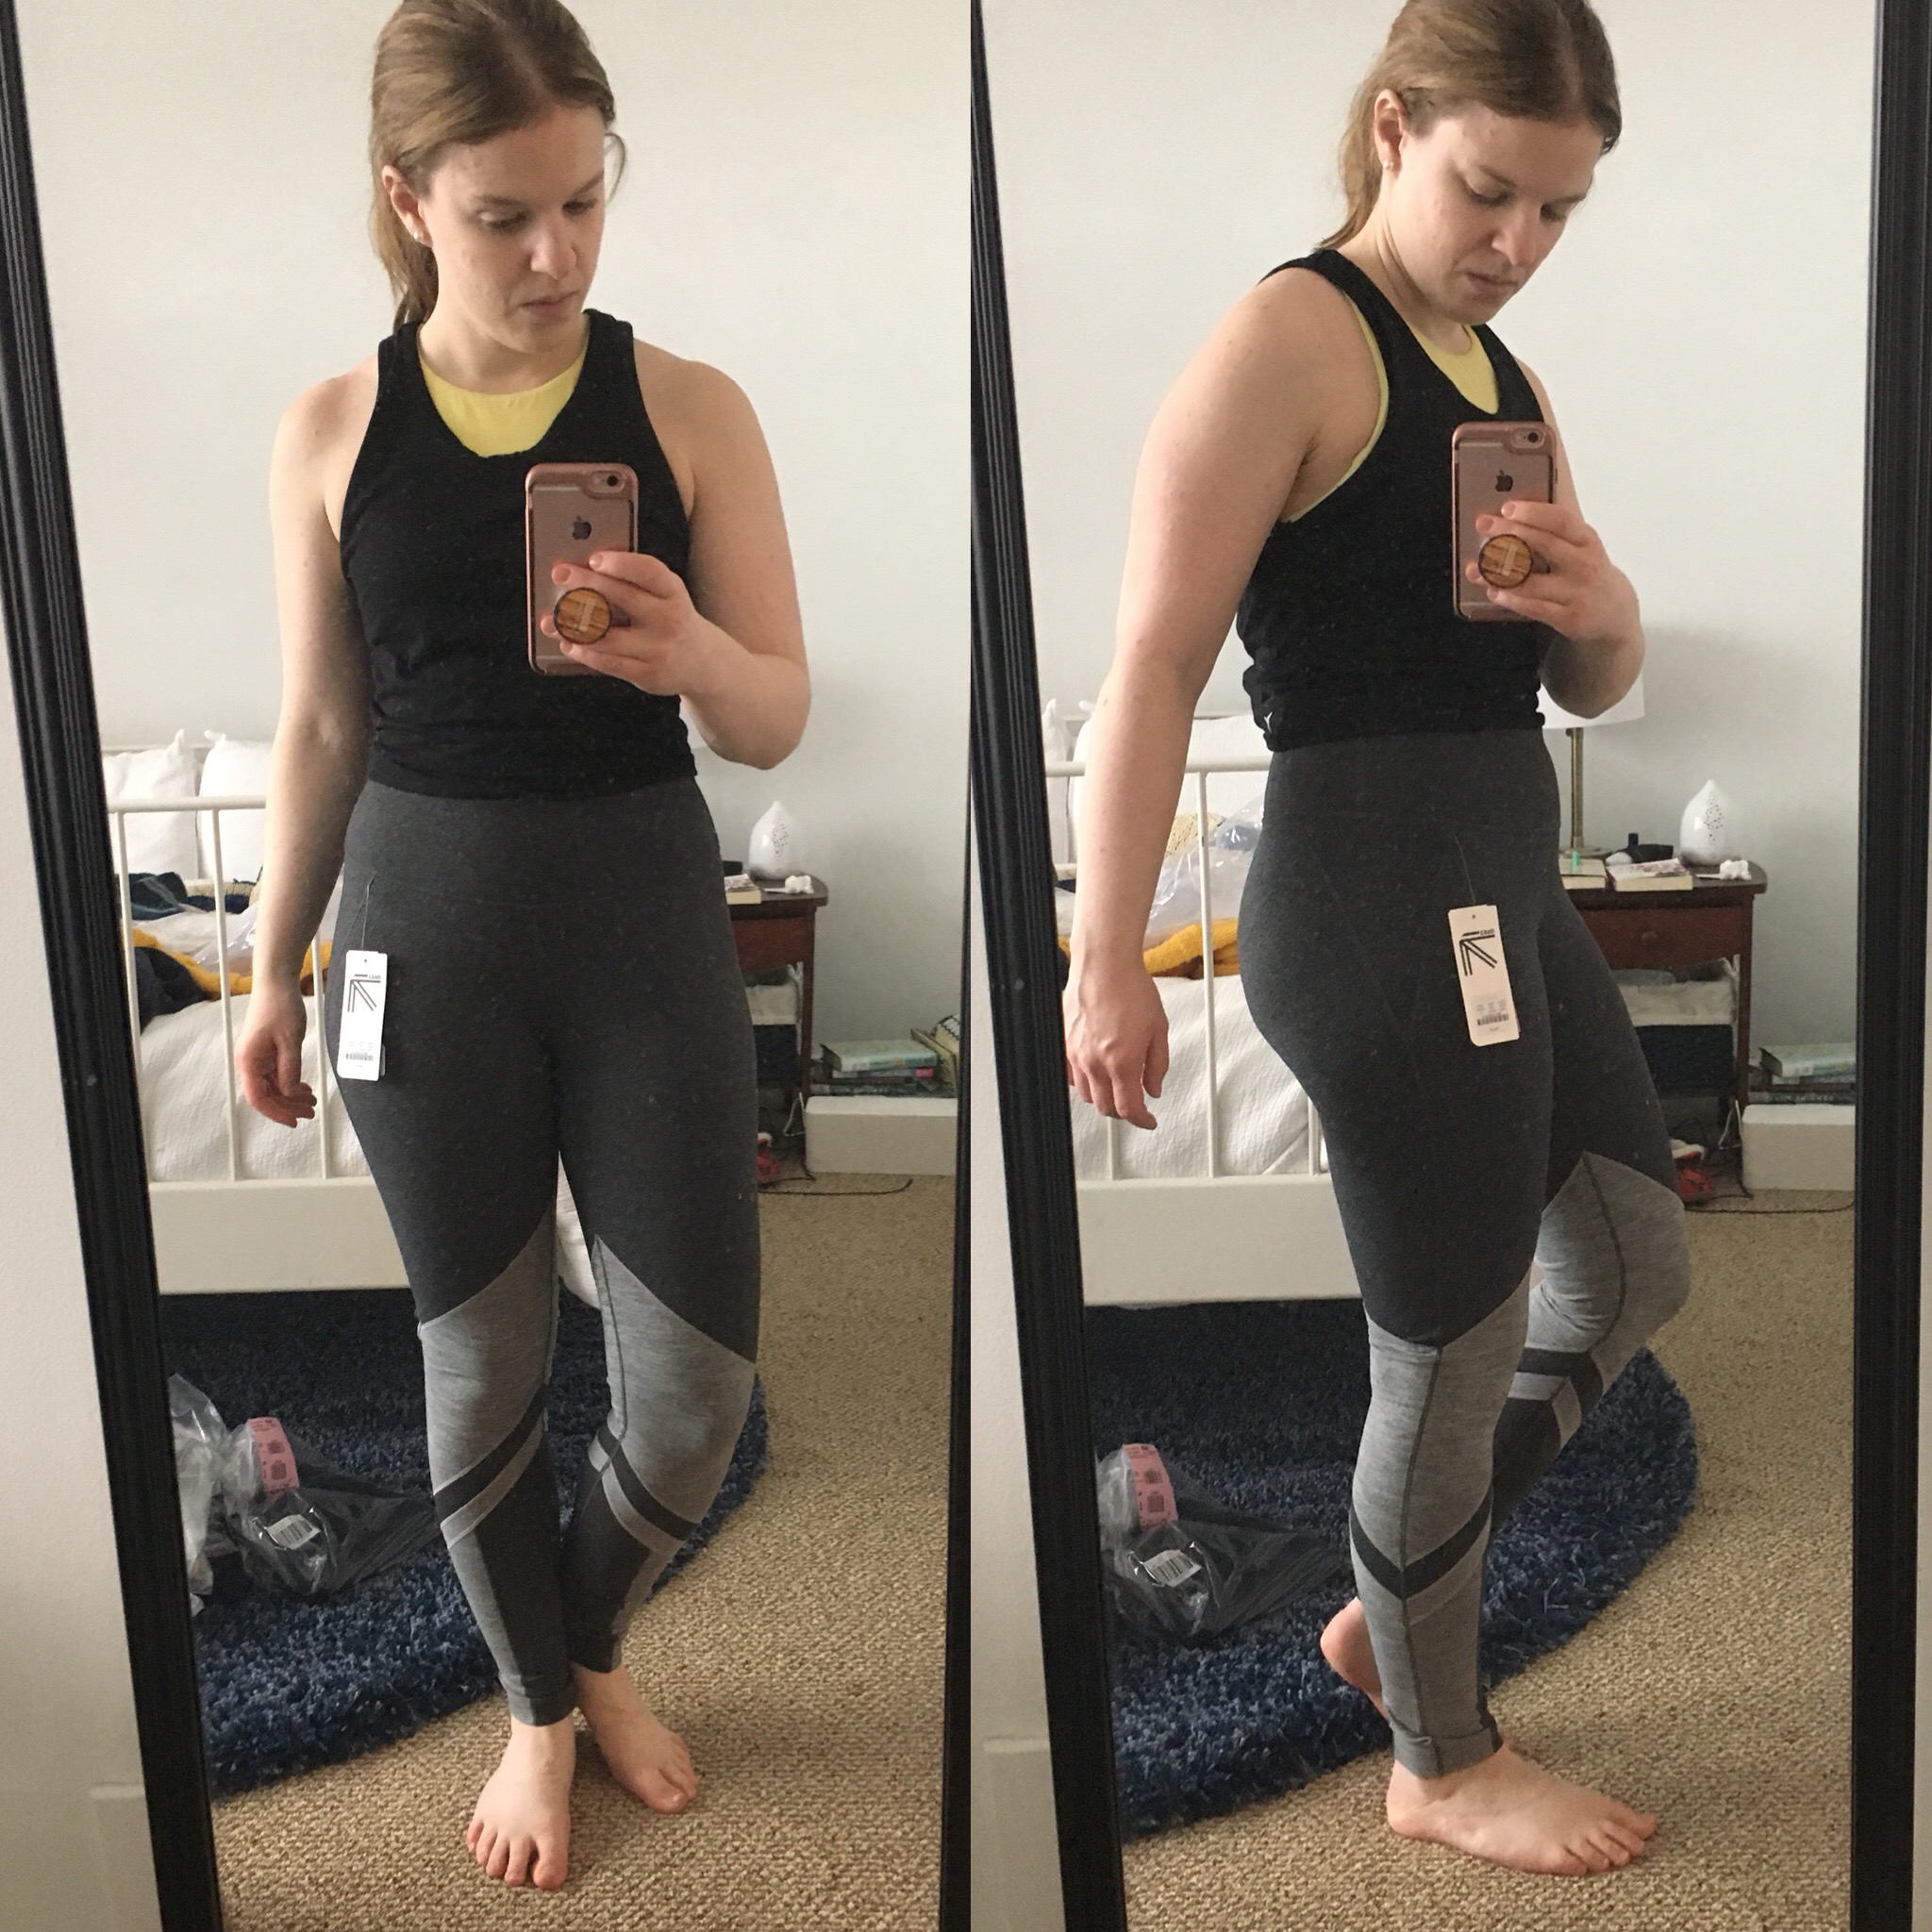 https://www.somethinggoodblog.com/wp-content/uploads/2018/01/New-Balance%C2%AE-for-J.Crew-performance-leggings-in-striped-colorblock_Somethng-Good.jpg